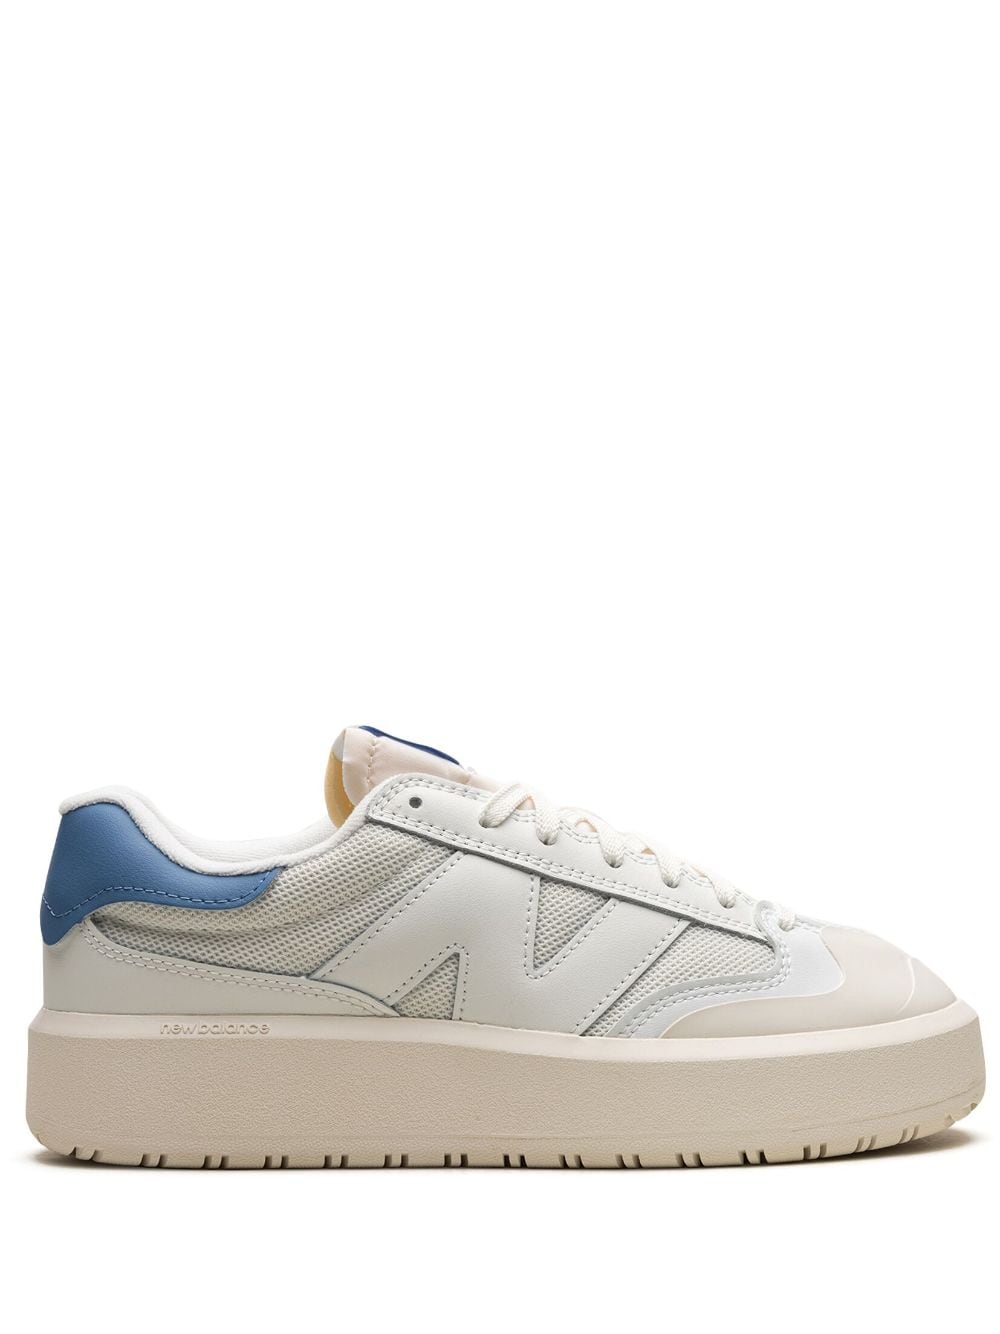 New Balance CT302 "White Heritage Blue" leather sneakers - Neutrals